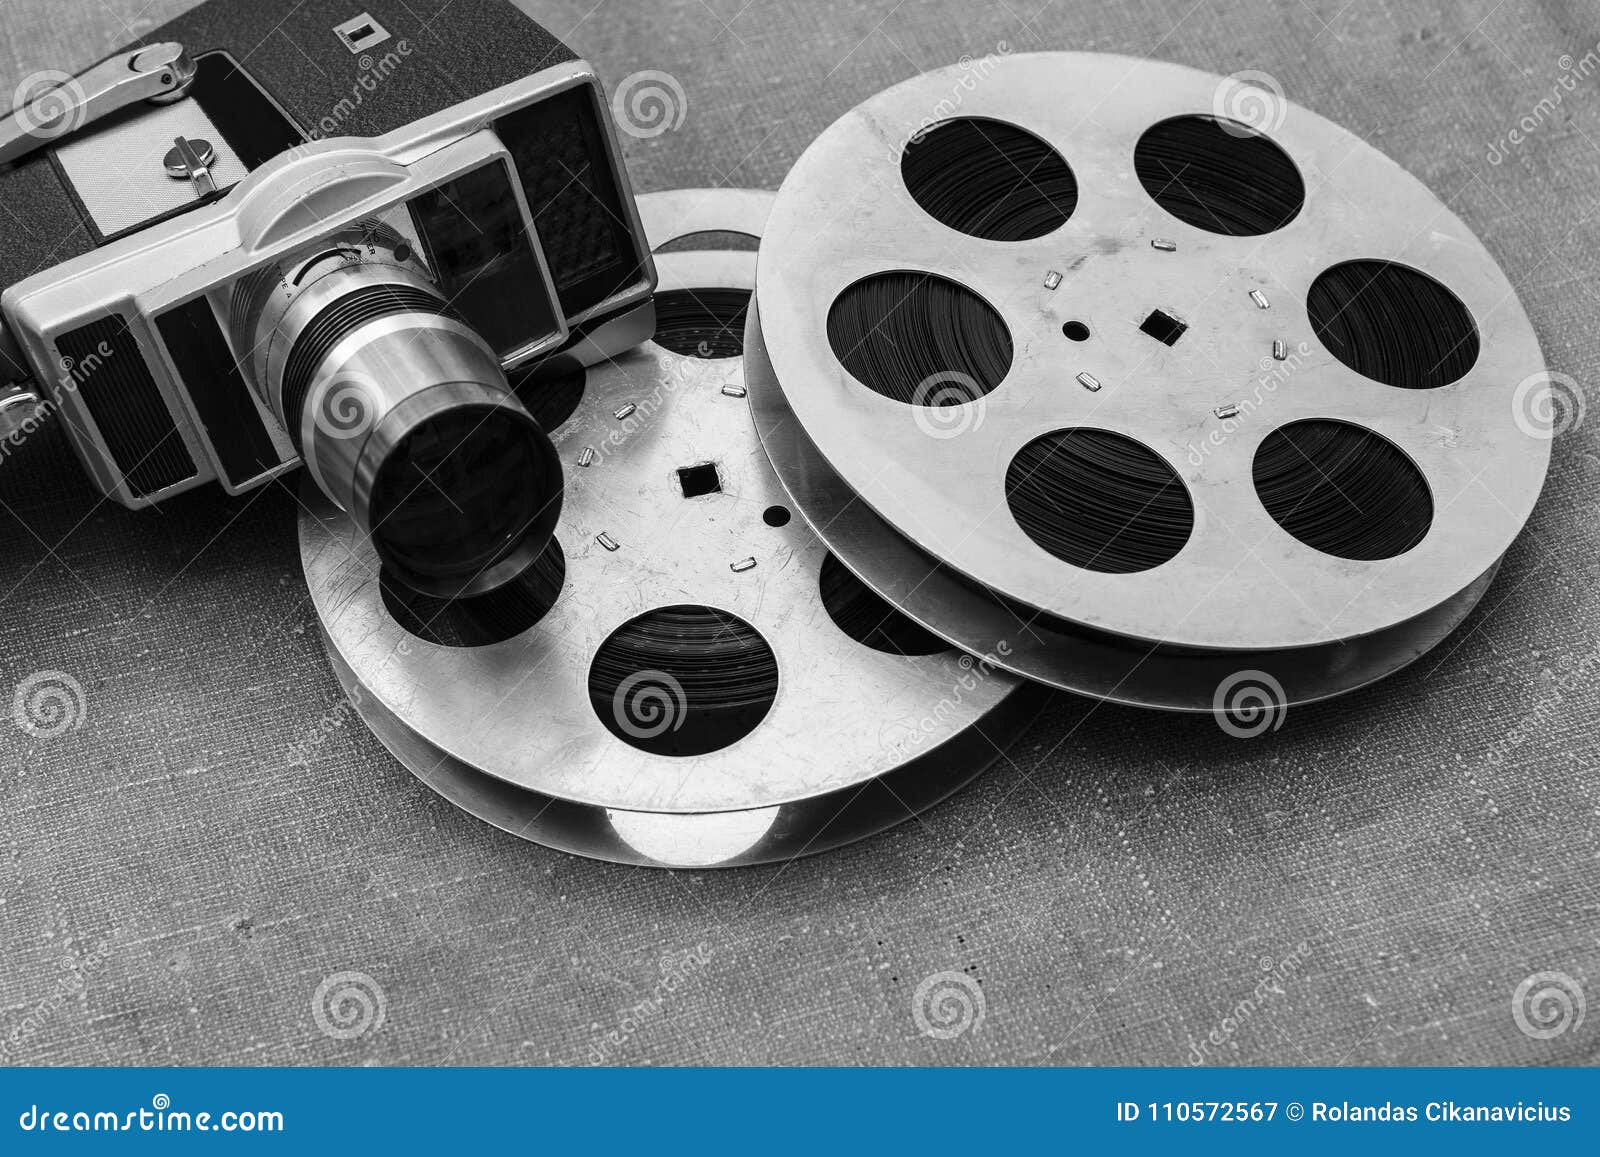 Old Movie Camera, Film Reels and Clapperboards Stock Image - Image